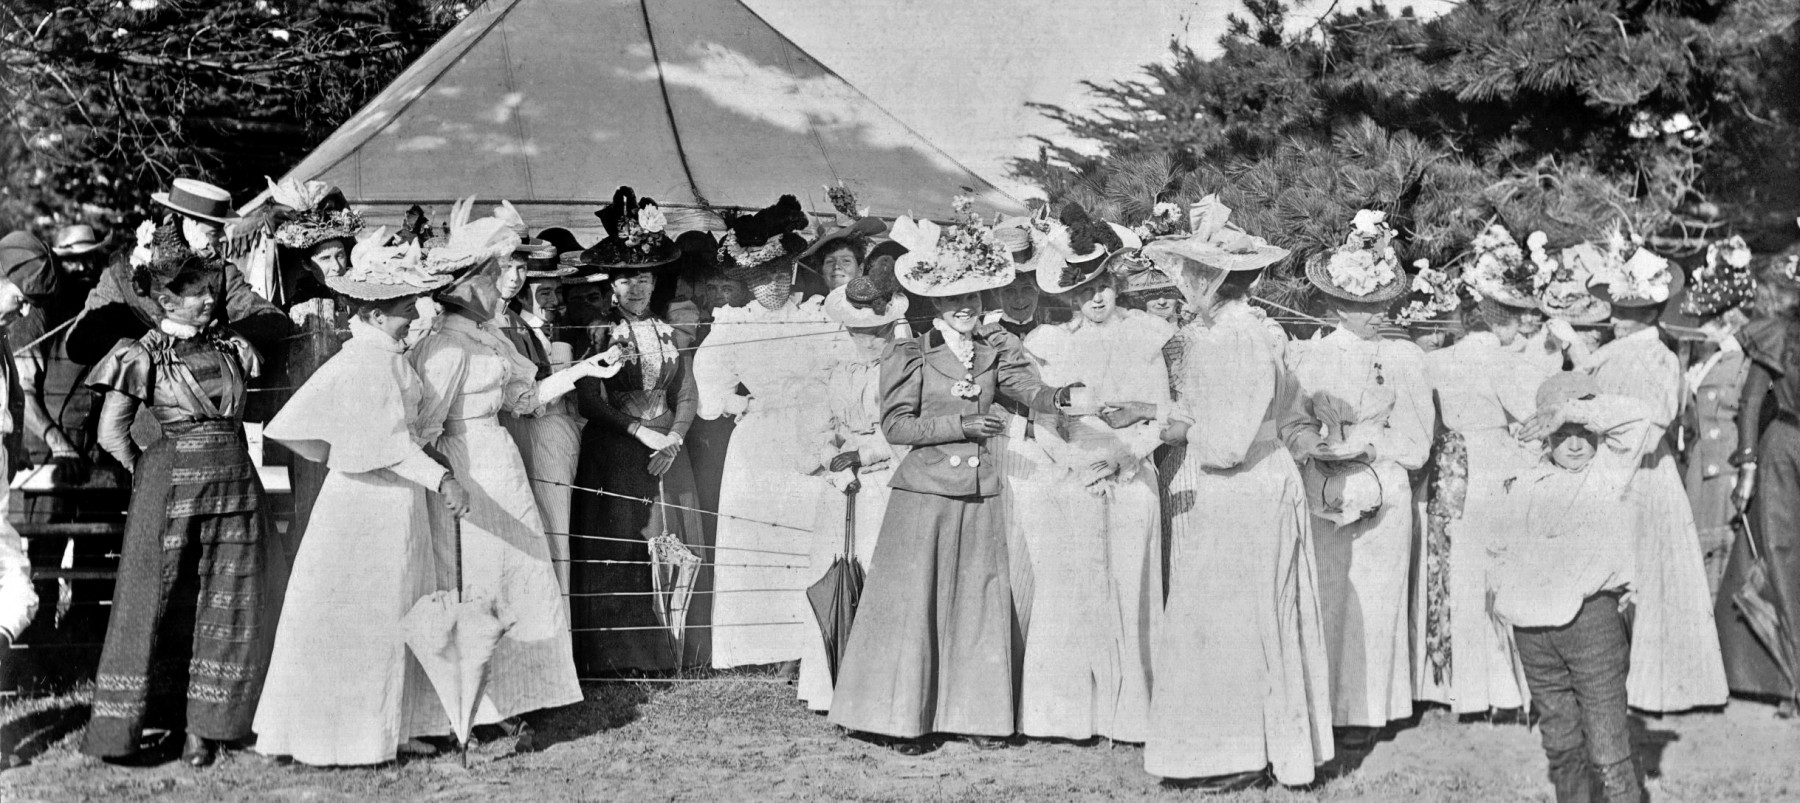 A group of women in hats and dresses gather in front of a marquee. 